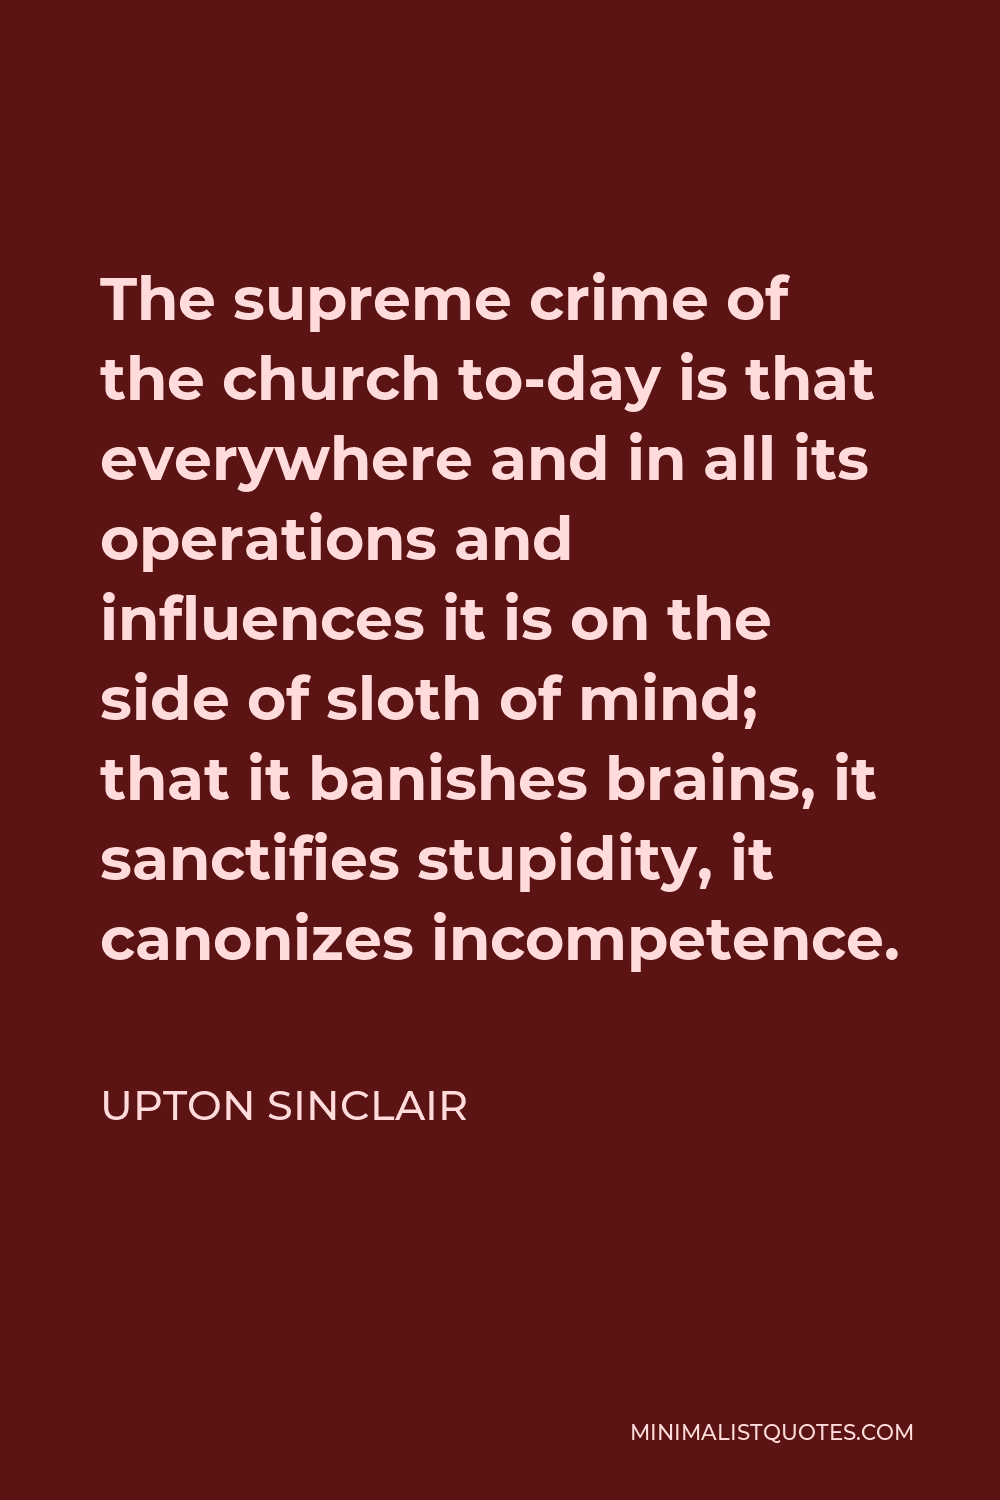 Upton Sinclair Quote - The supreme crime of the church to-day is that everywhere and in all its operations and influences it is on the side of sloth of mind; that it banishes brains, it sanctifies stupidity, it canonizes incompetence.